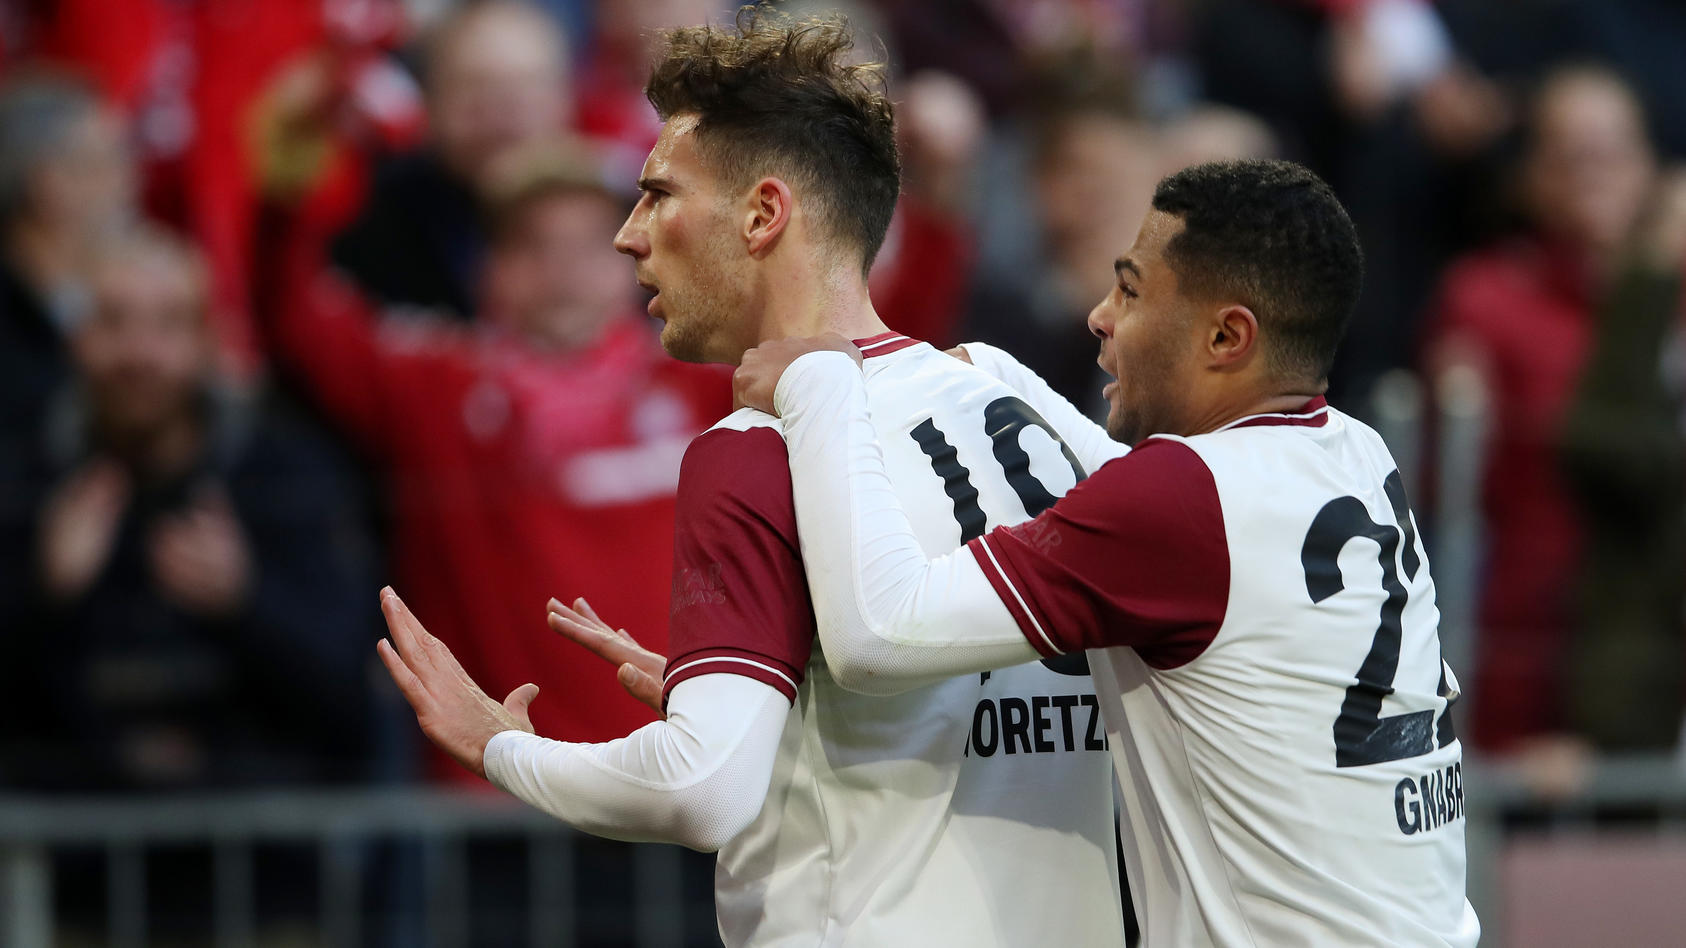 MUNICH, GERMANY - MARCH 08: Leon Goretzka of Bayern Munich celebrates with teammate Serge Gnabry after scoring his team's second goal during the Bundesliga match between FC Bayern Muenchen and FC Augsburg at Allianz Arena on March 08, 2020 in Munich,